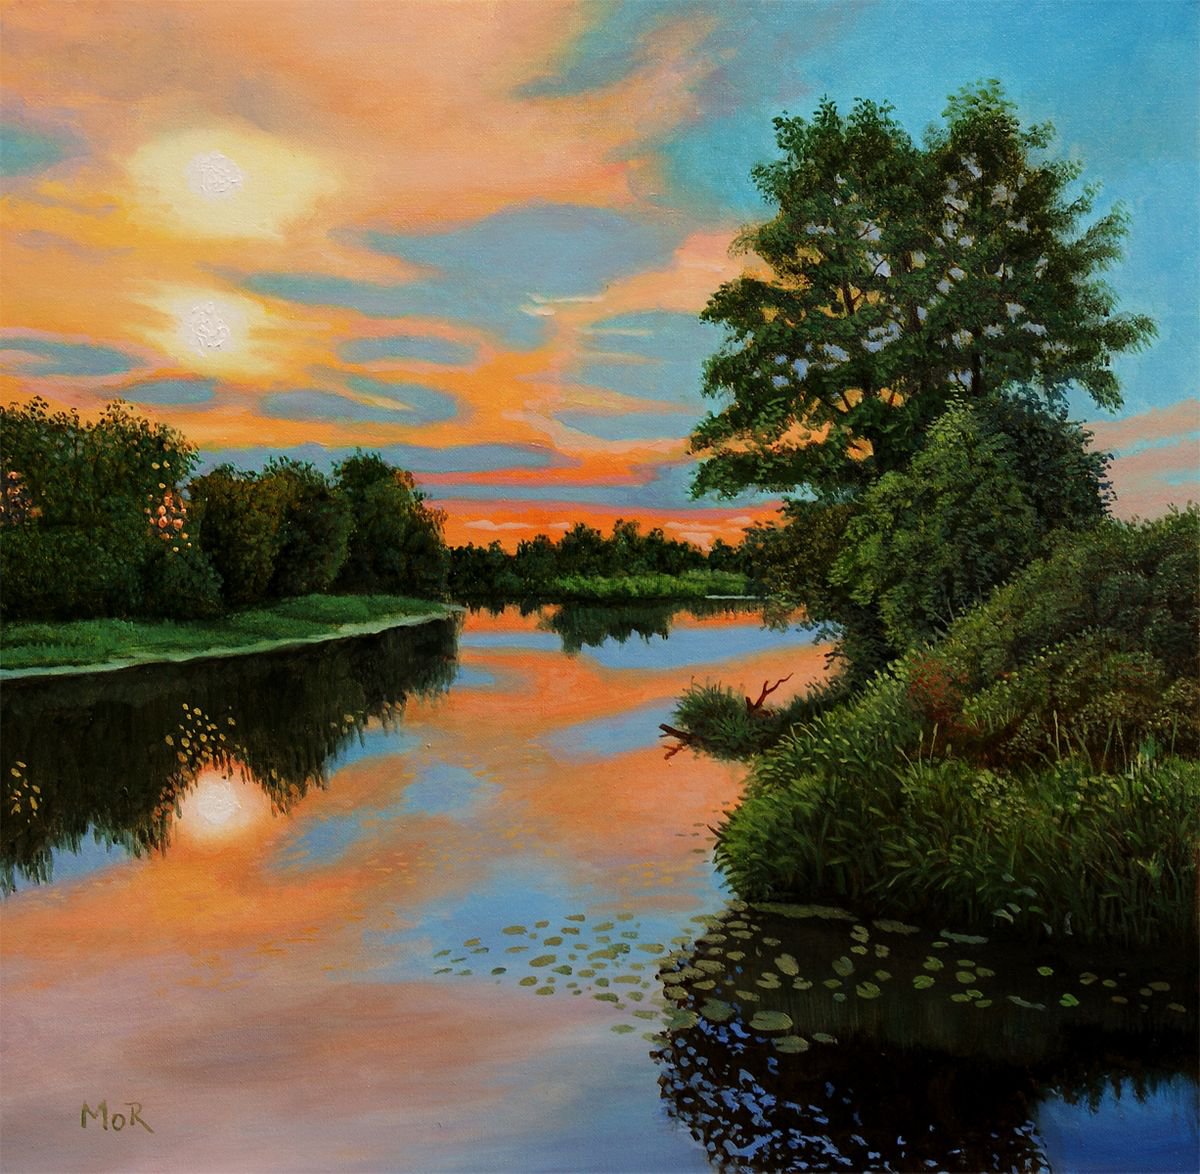 Sunset on the River by Dietrich Moravec